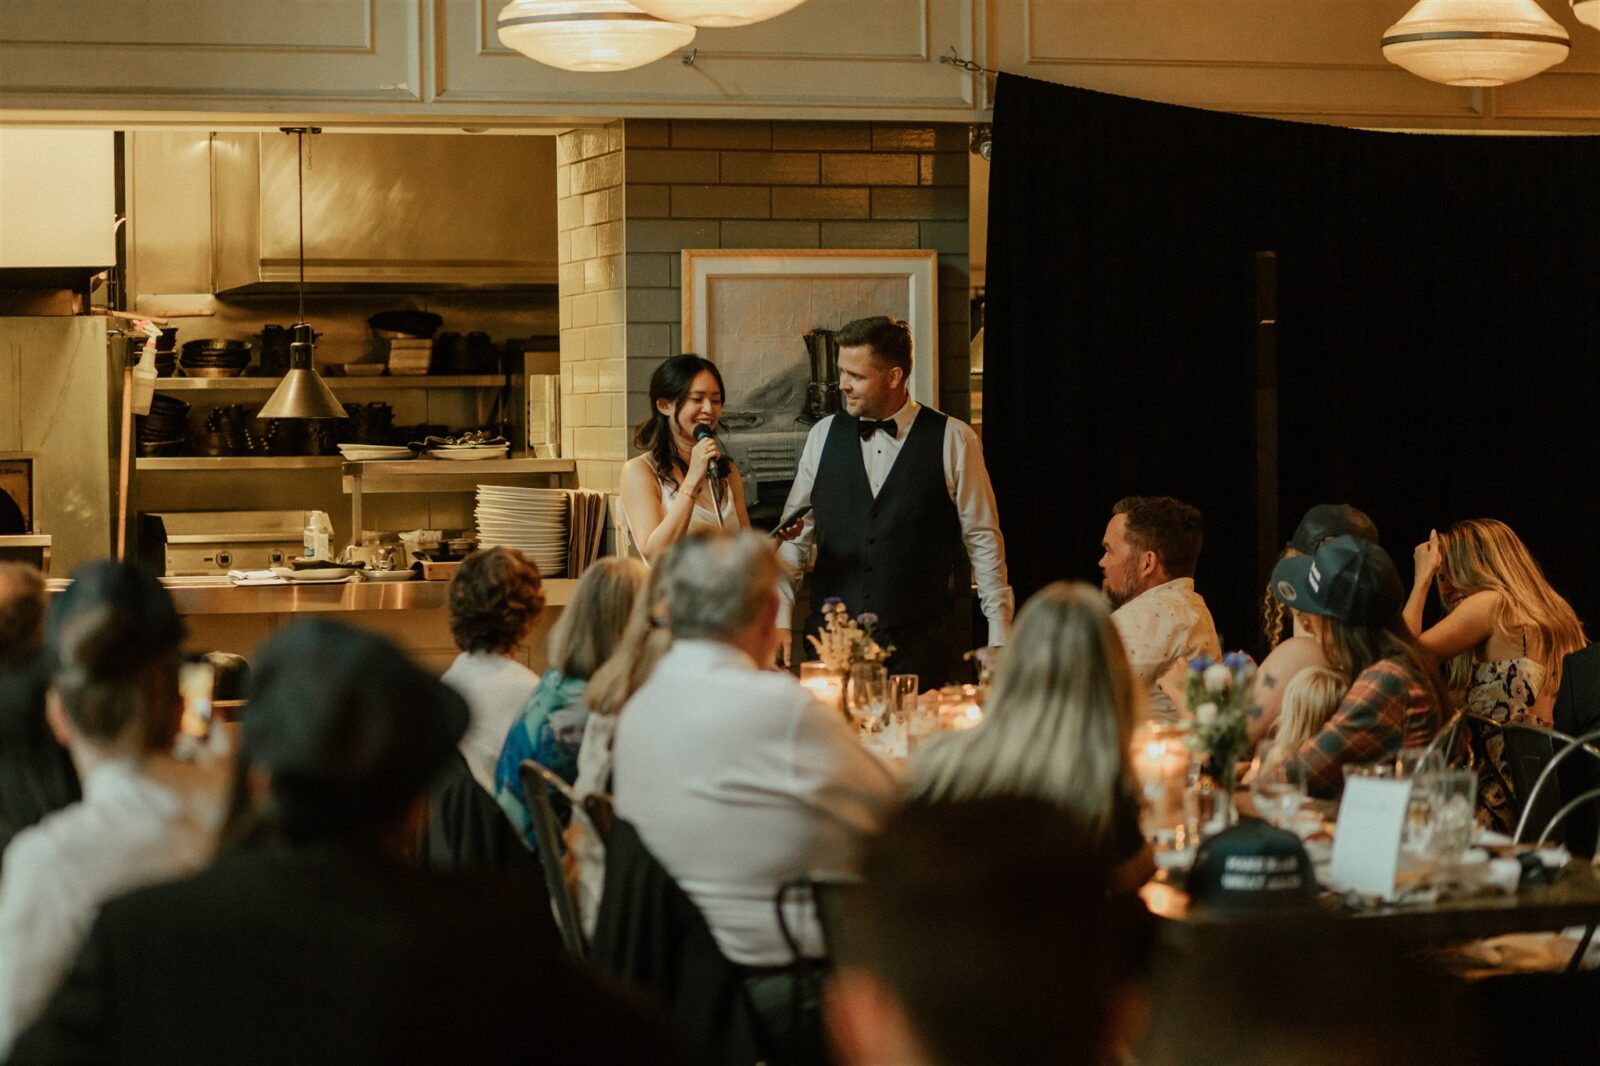 Couple stands for speech during intimate wedding reception dinner at Cafe Medina in Vancouver, captured by Abigail Eveline Photography.